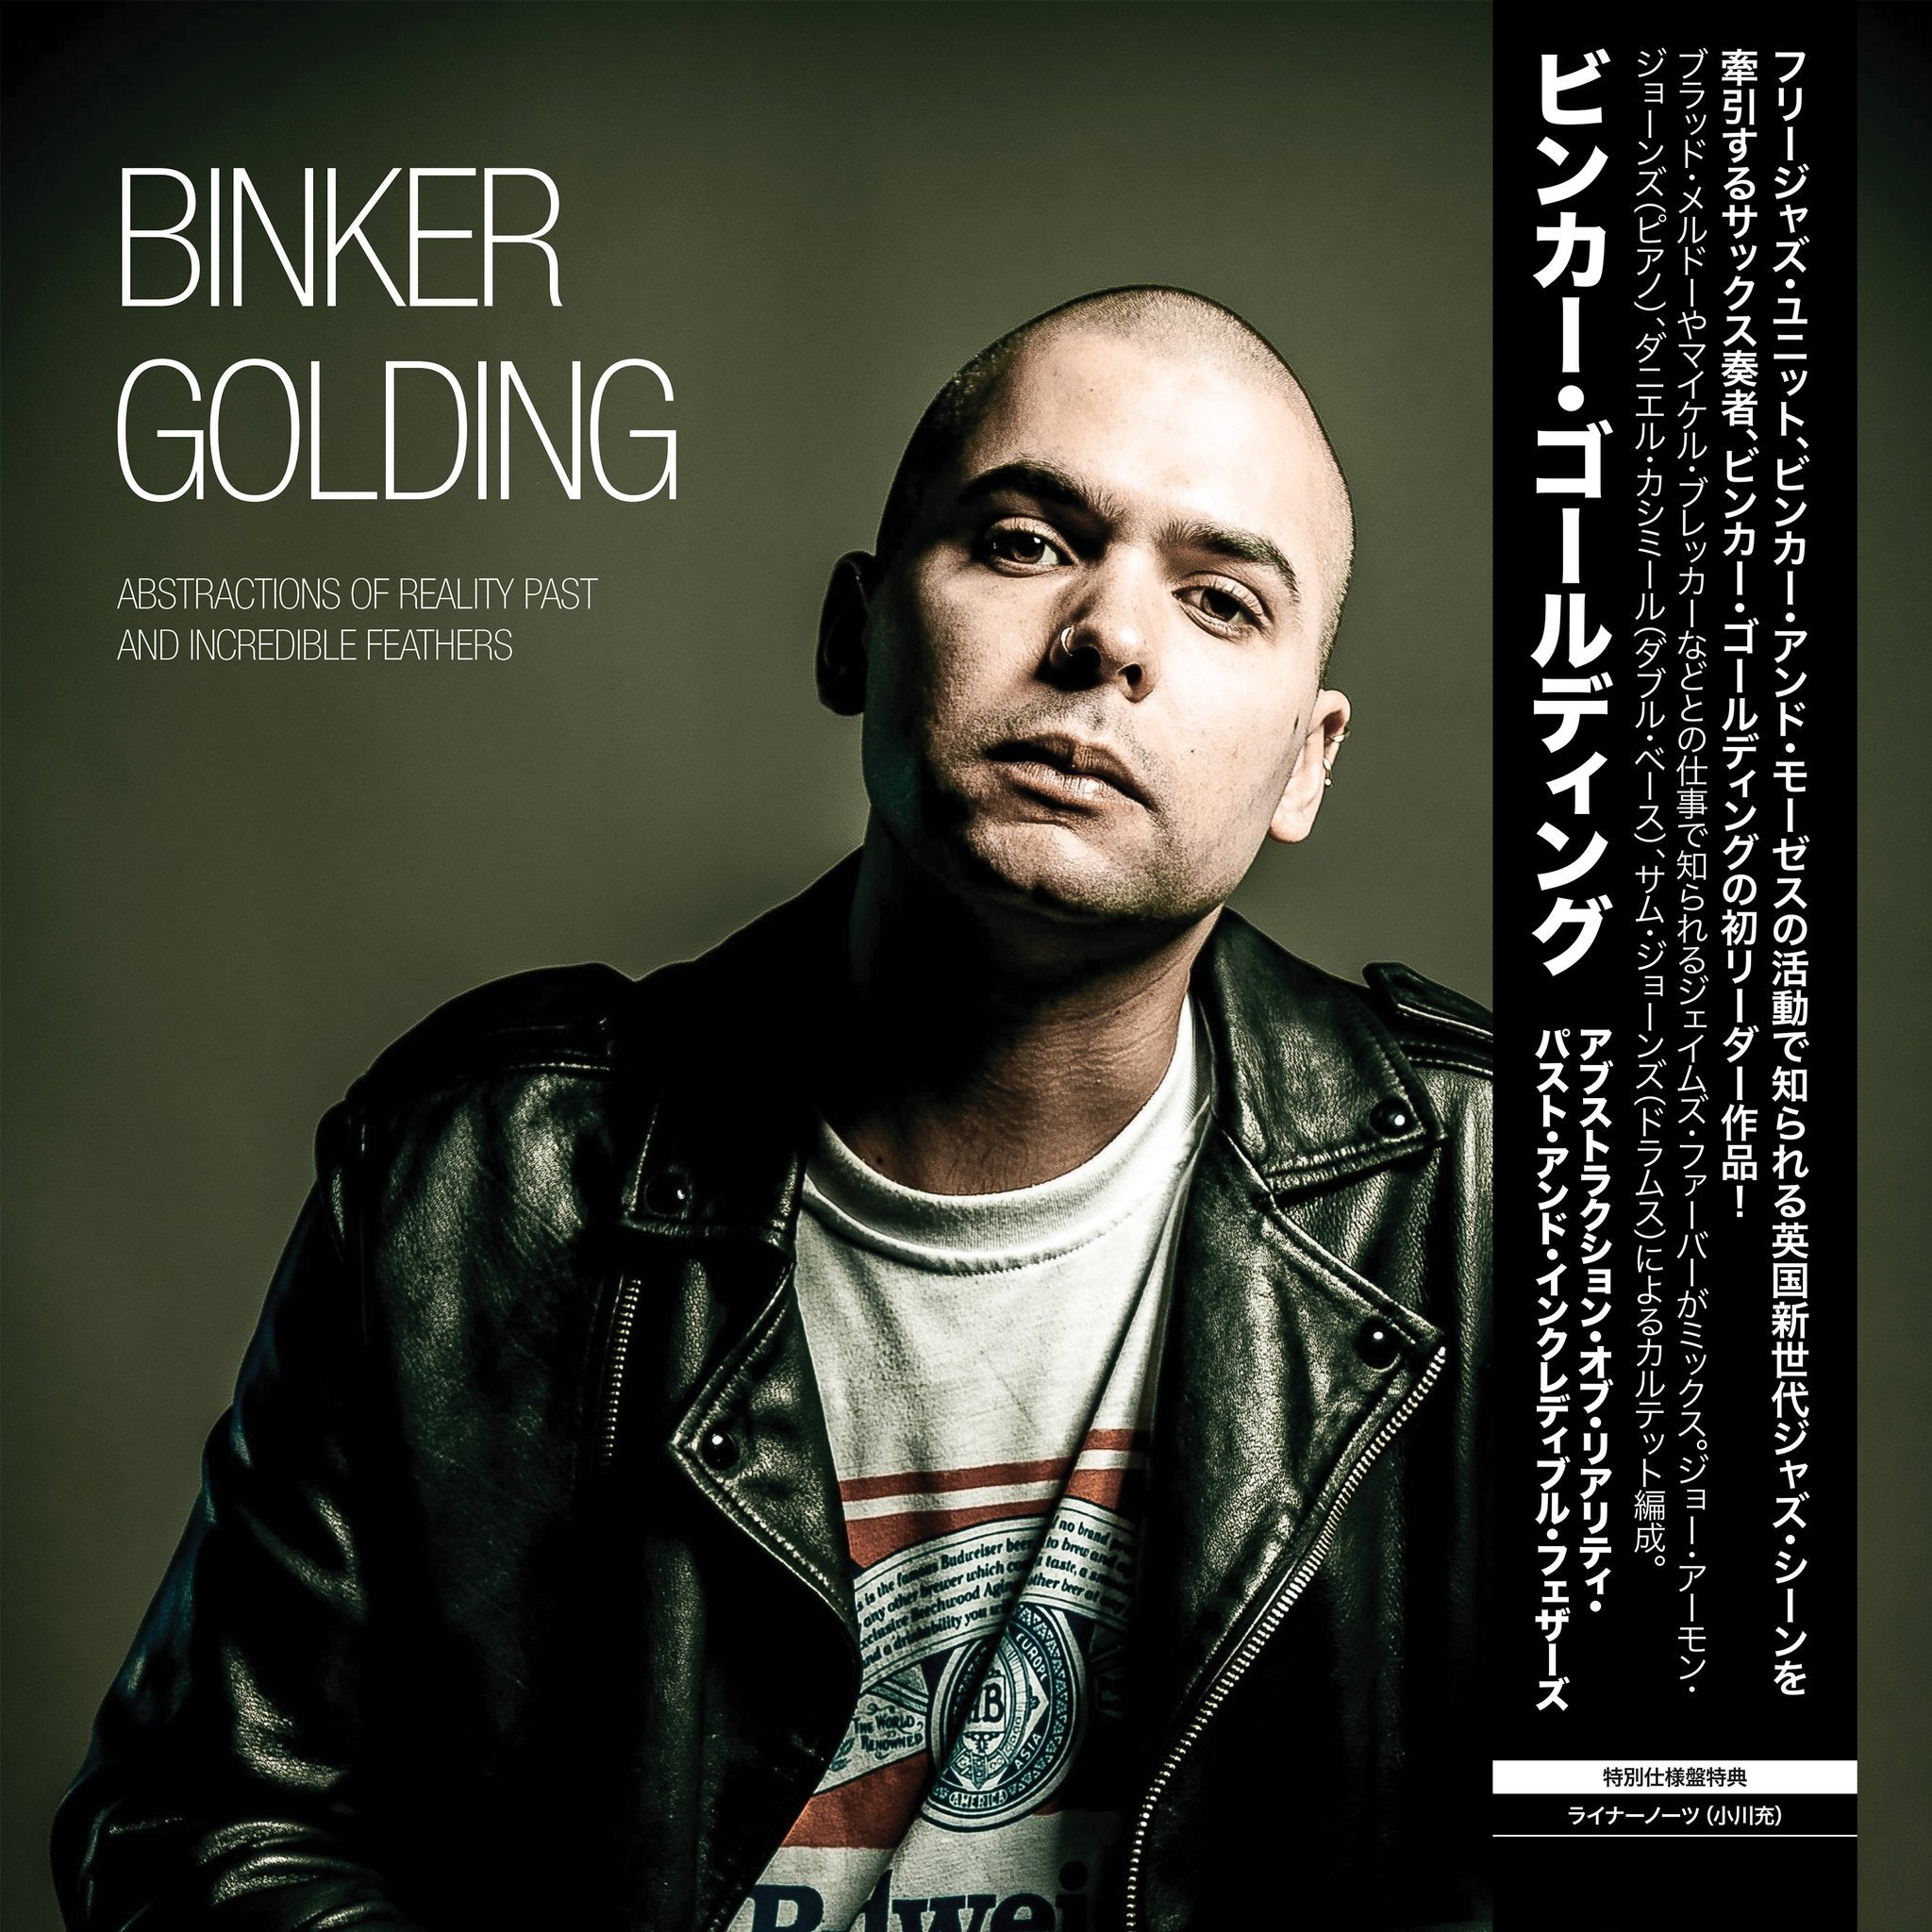 BINKER GOLDING - Abstractions of Reality Past and Incredible Feathers (Official Japanese Edition) - LP - Limited 180g Vinyl